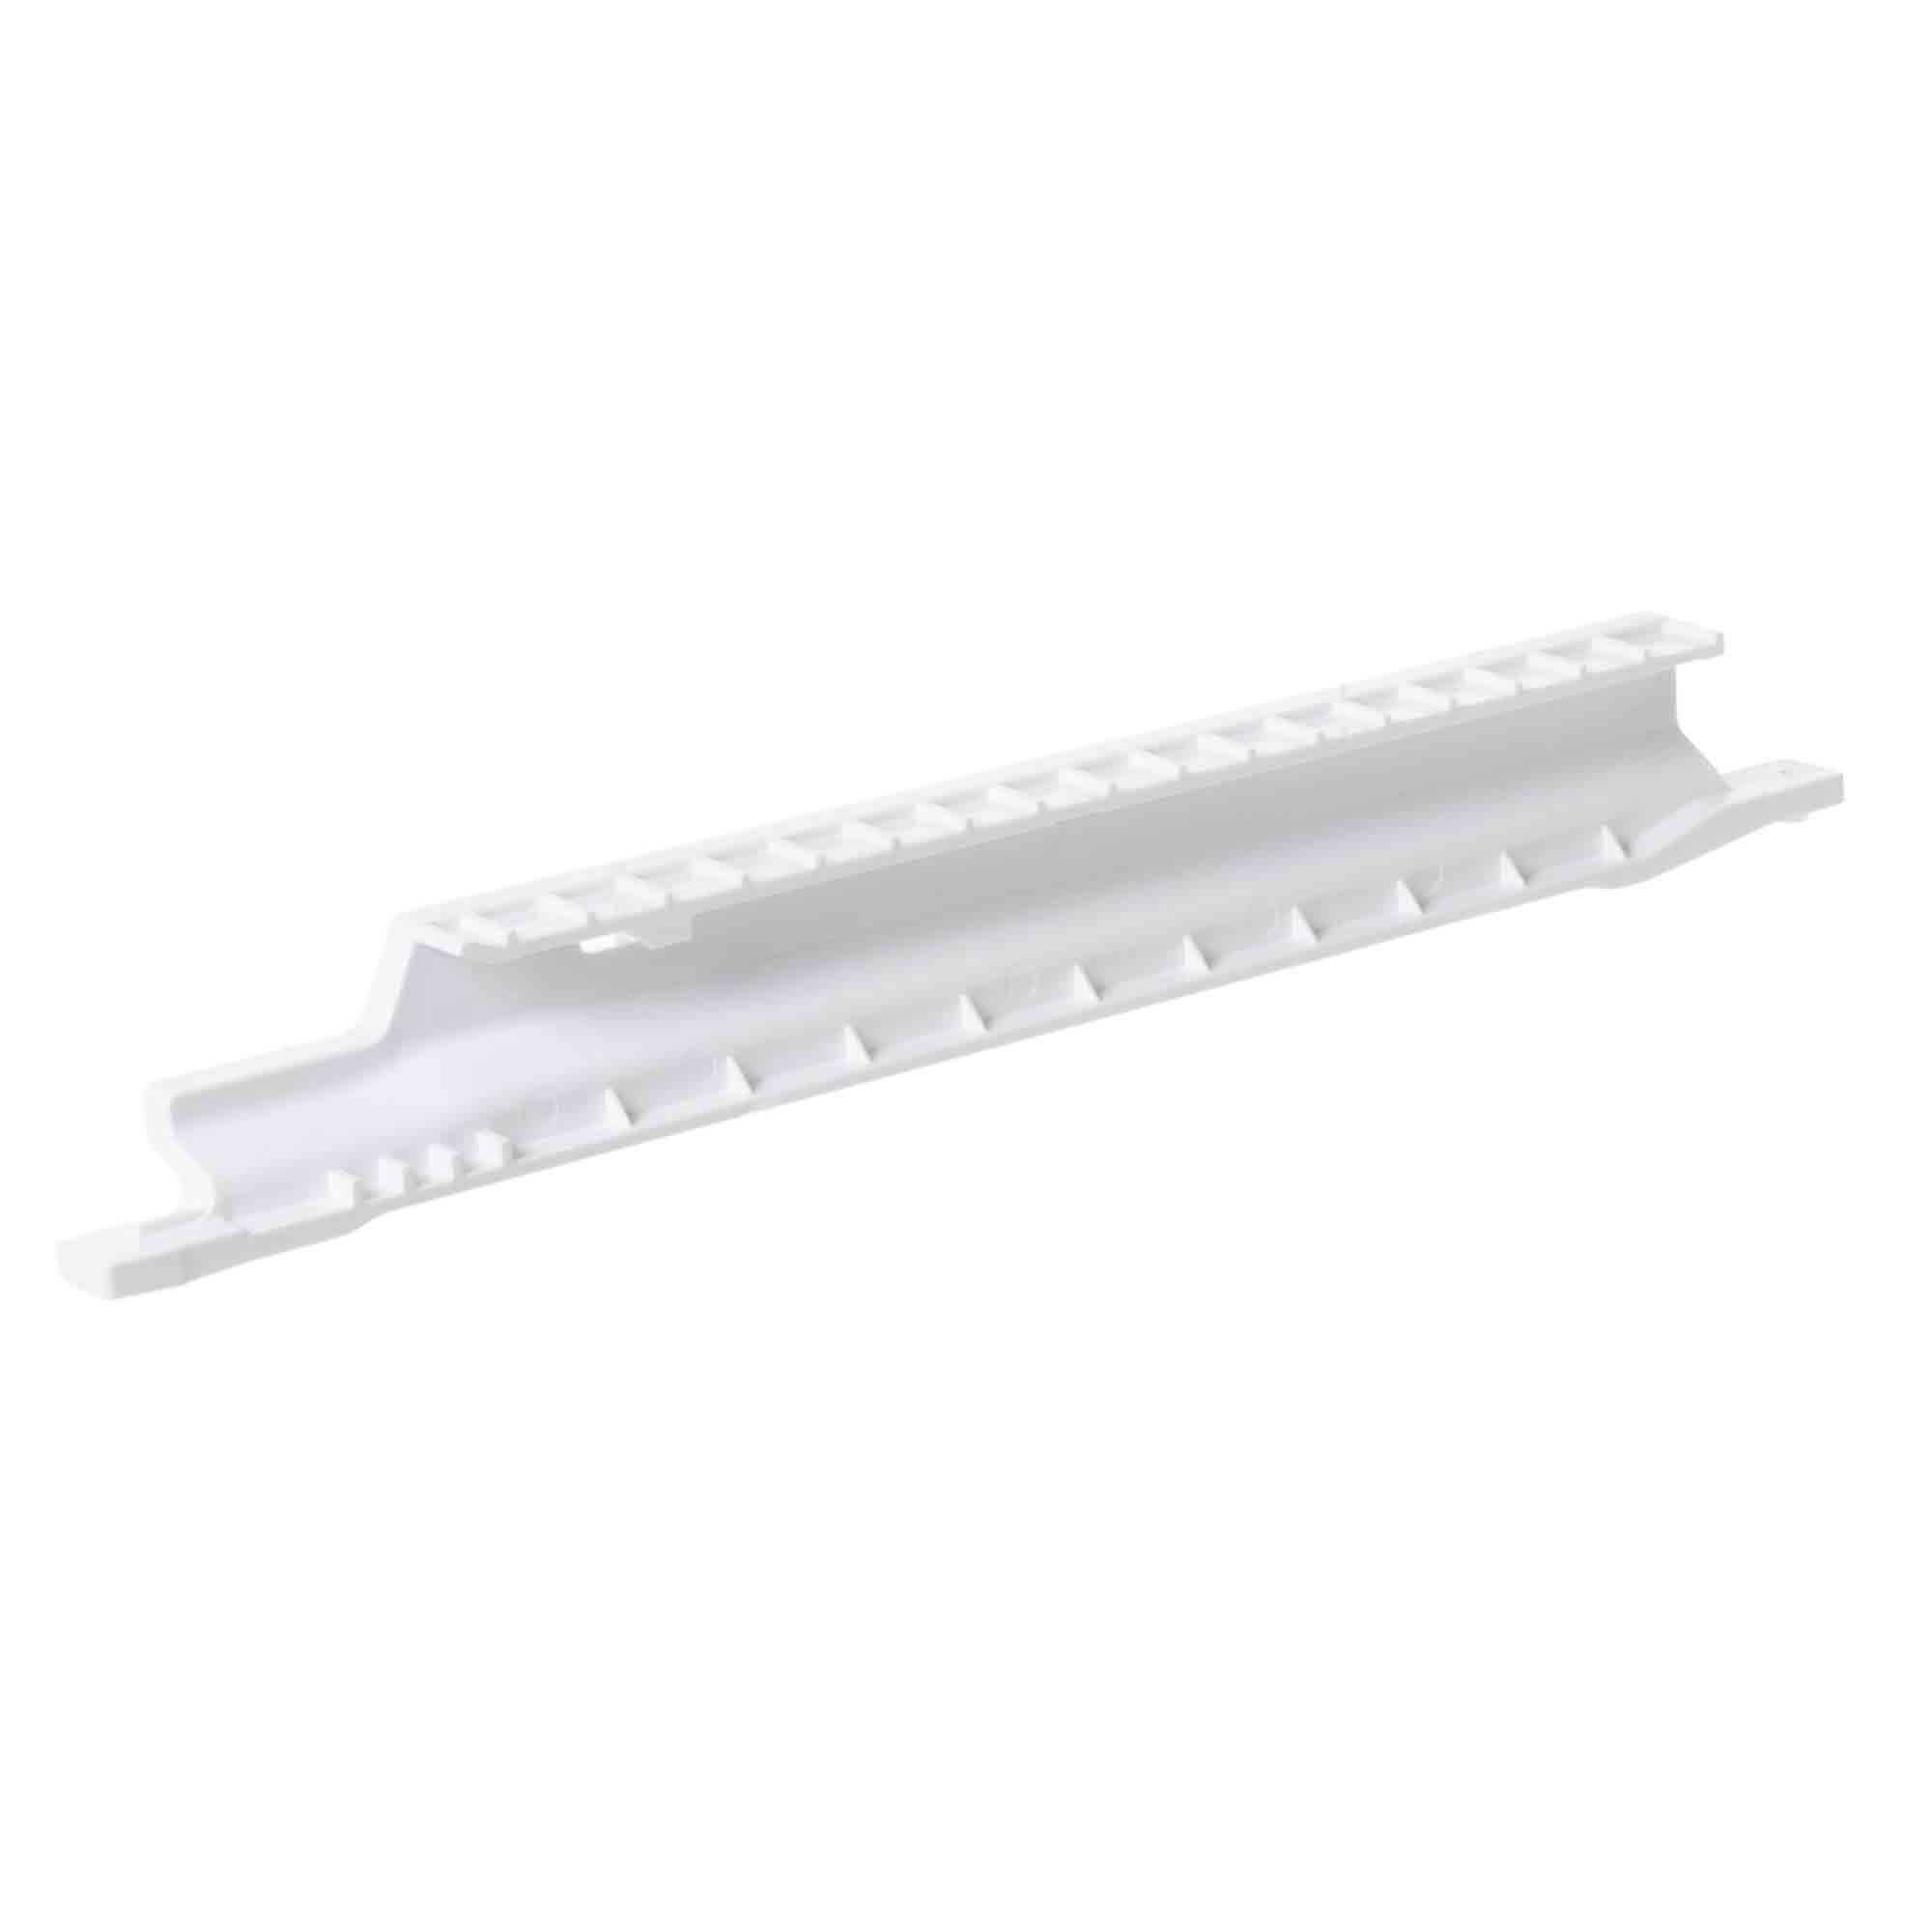 WR72X21684 For GE Refrigerator Snack Pan Rail